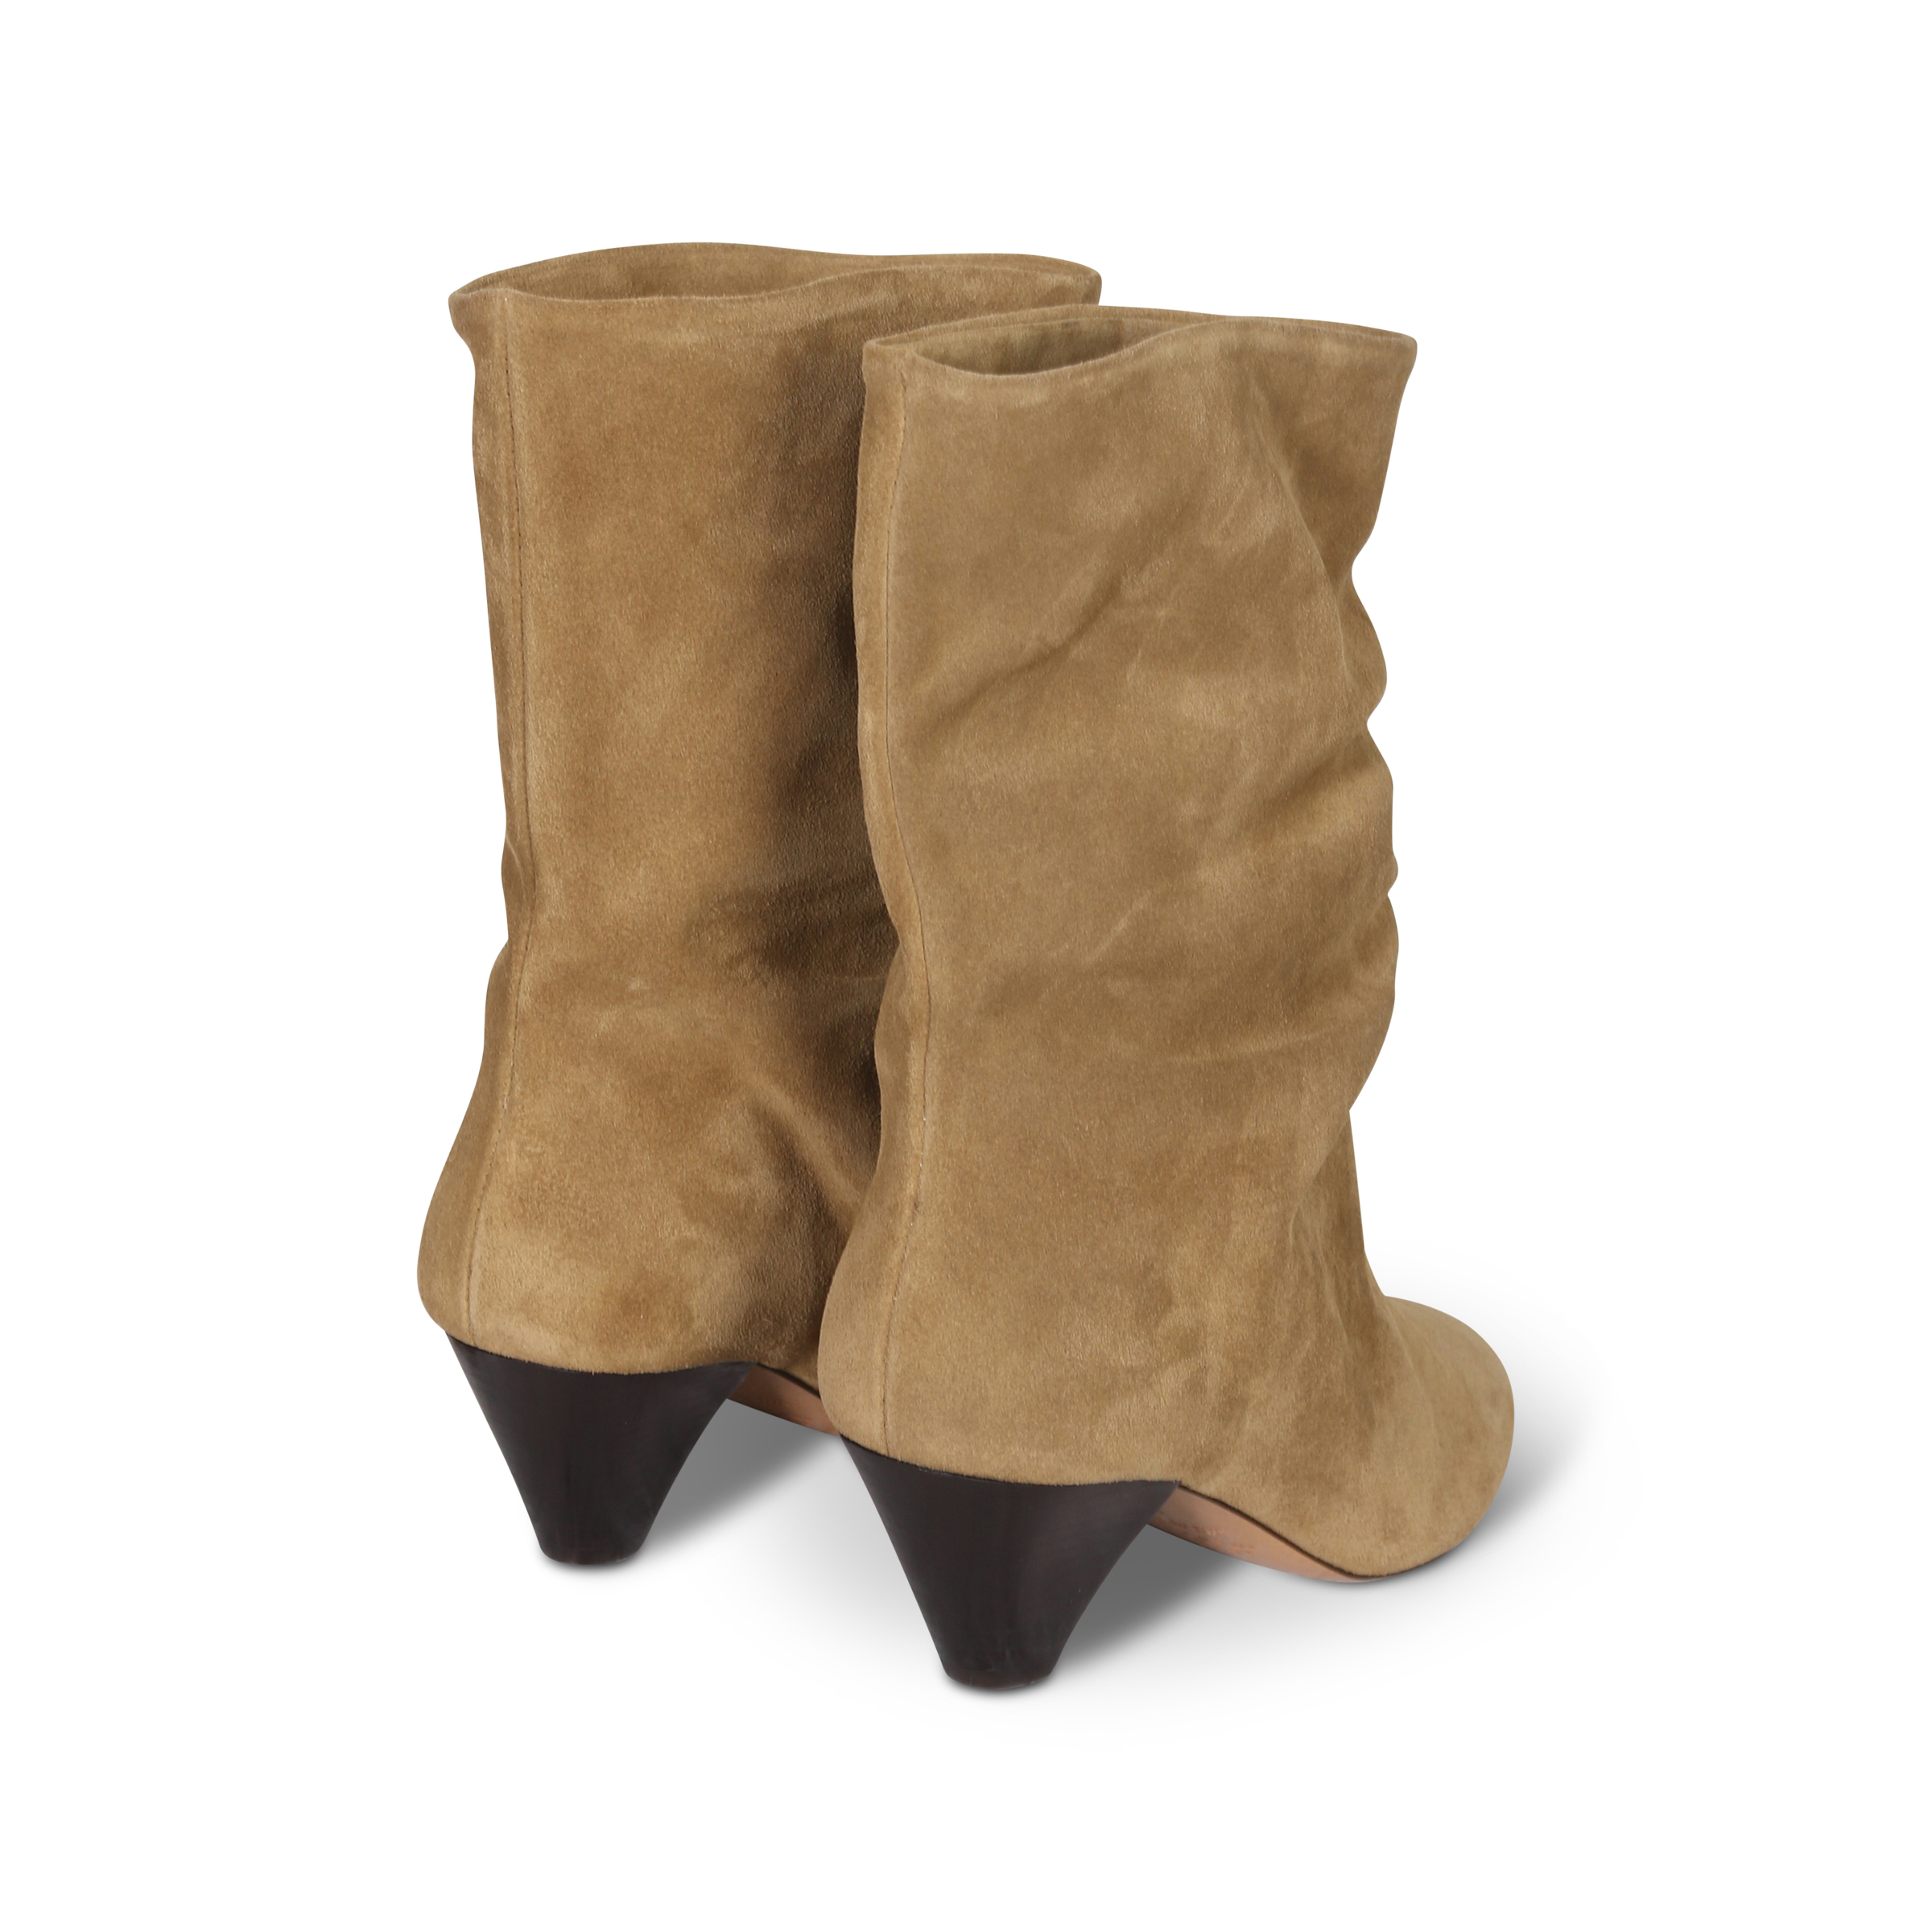 ISABEL MARANT Reachi Boots in Taupe 37